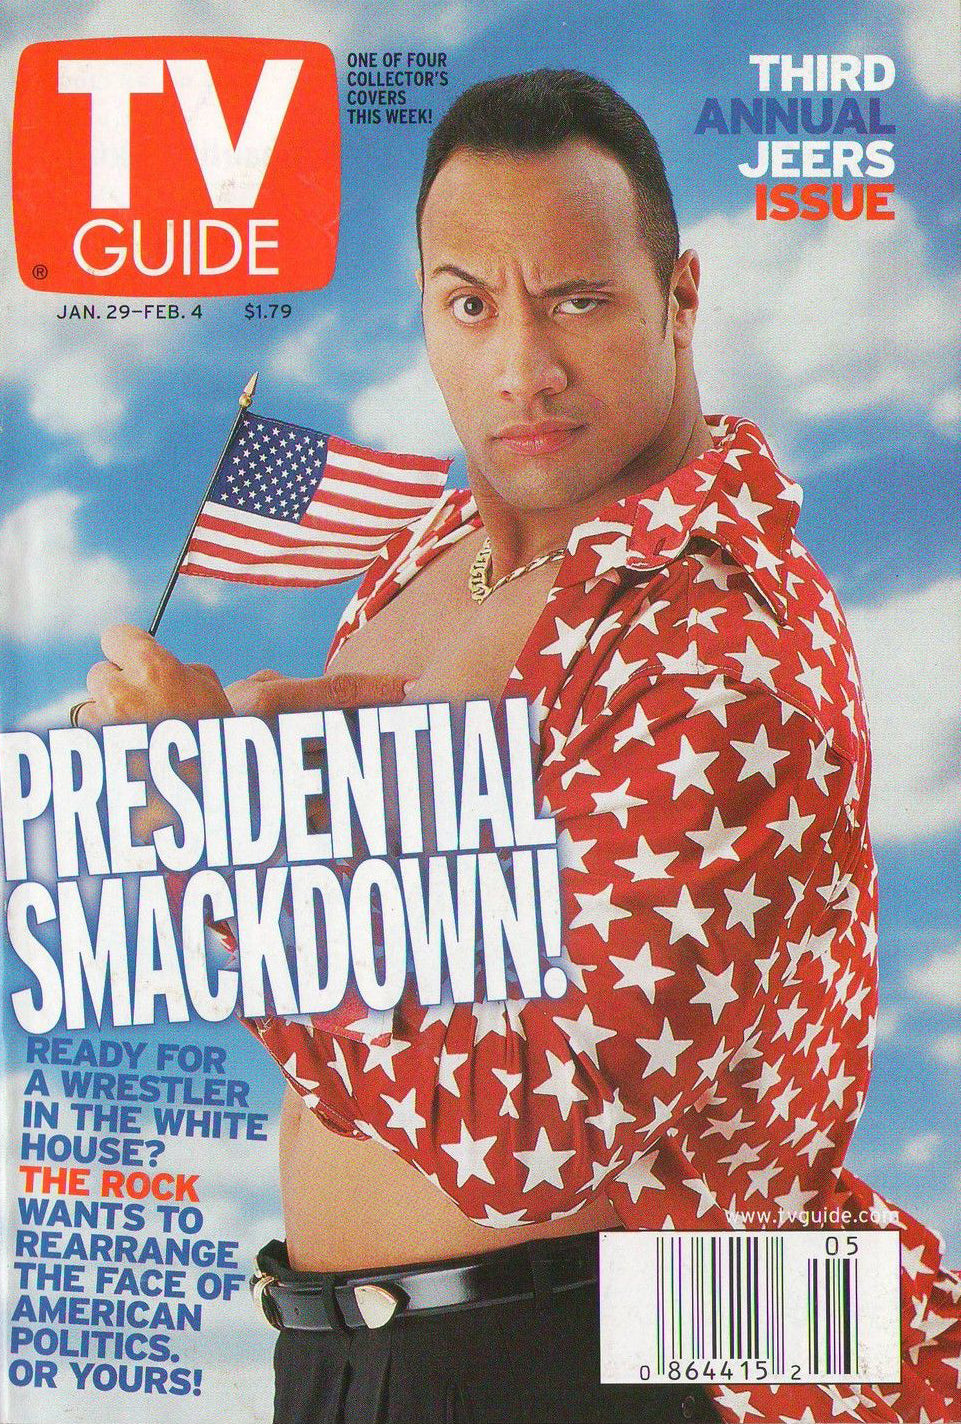 TV Guide January 2000 The Rock 1 of 4